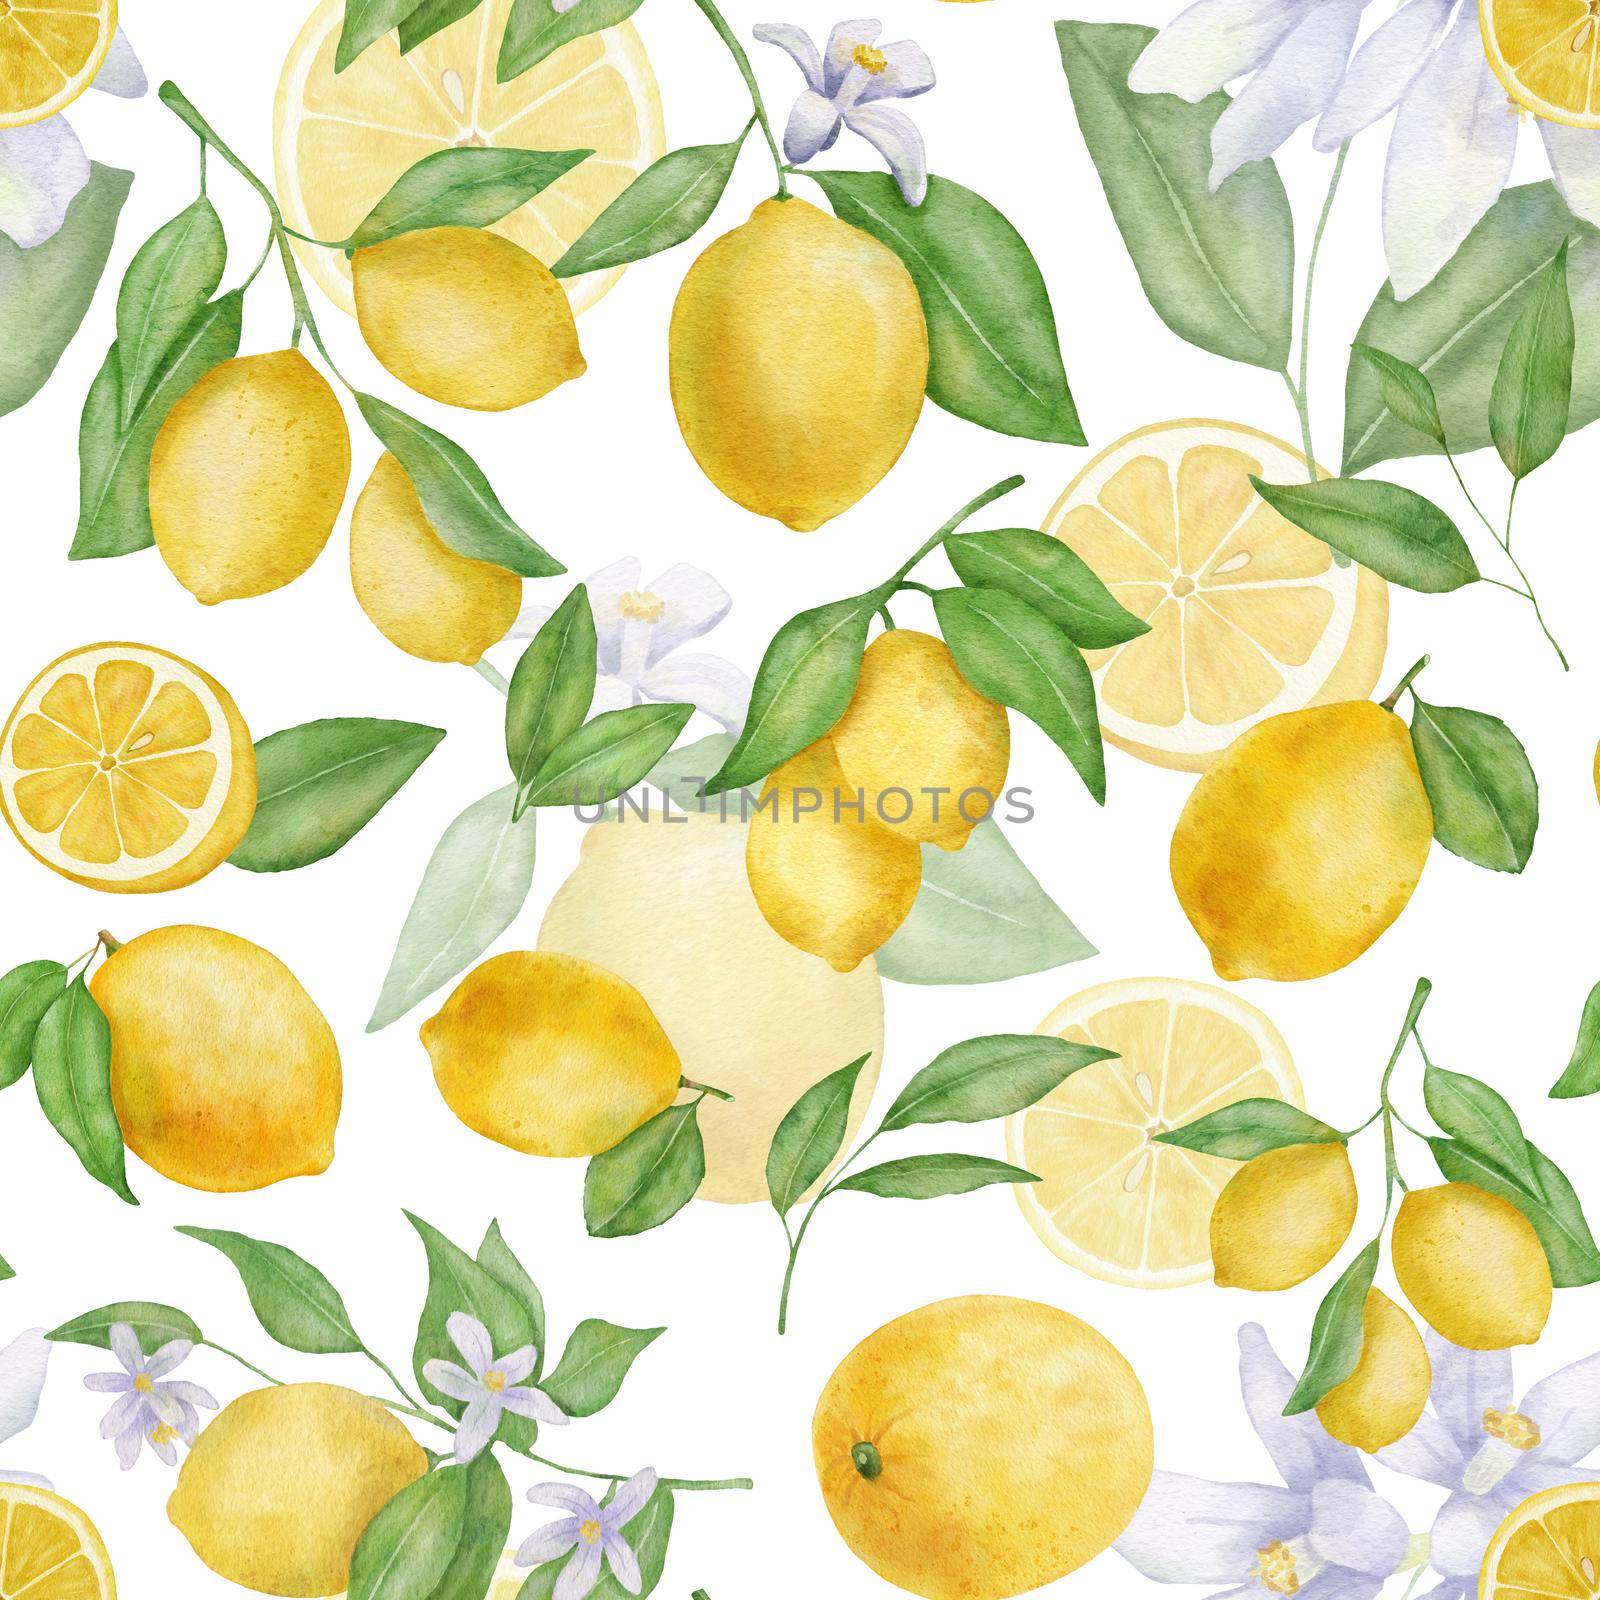 Lemon fruits with leaves and flower watercolor seamless pattern. by ElenaPlatova